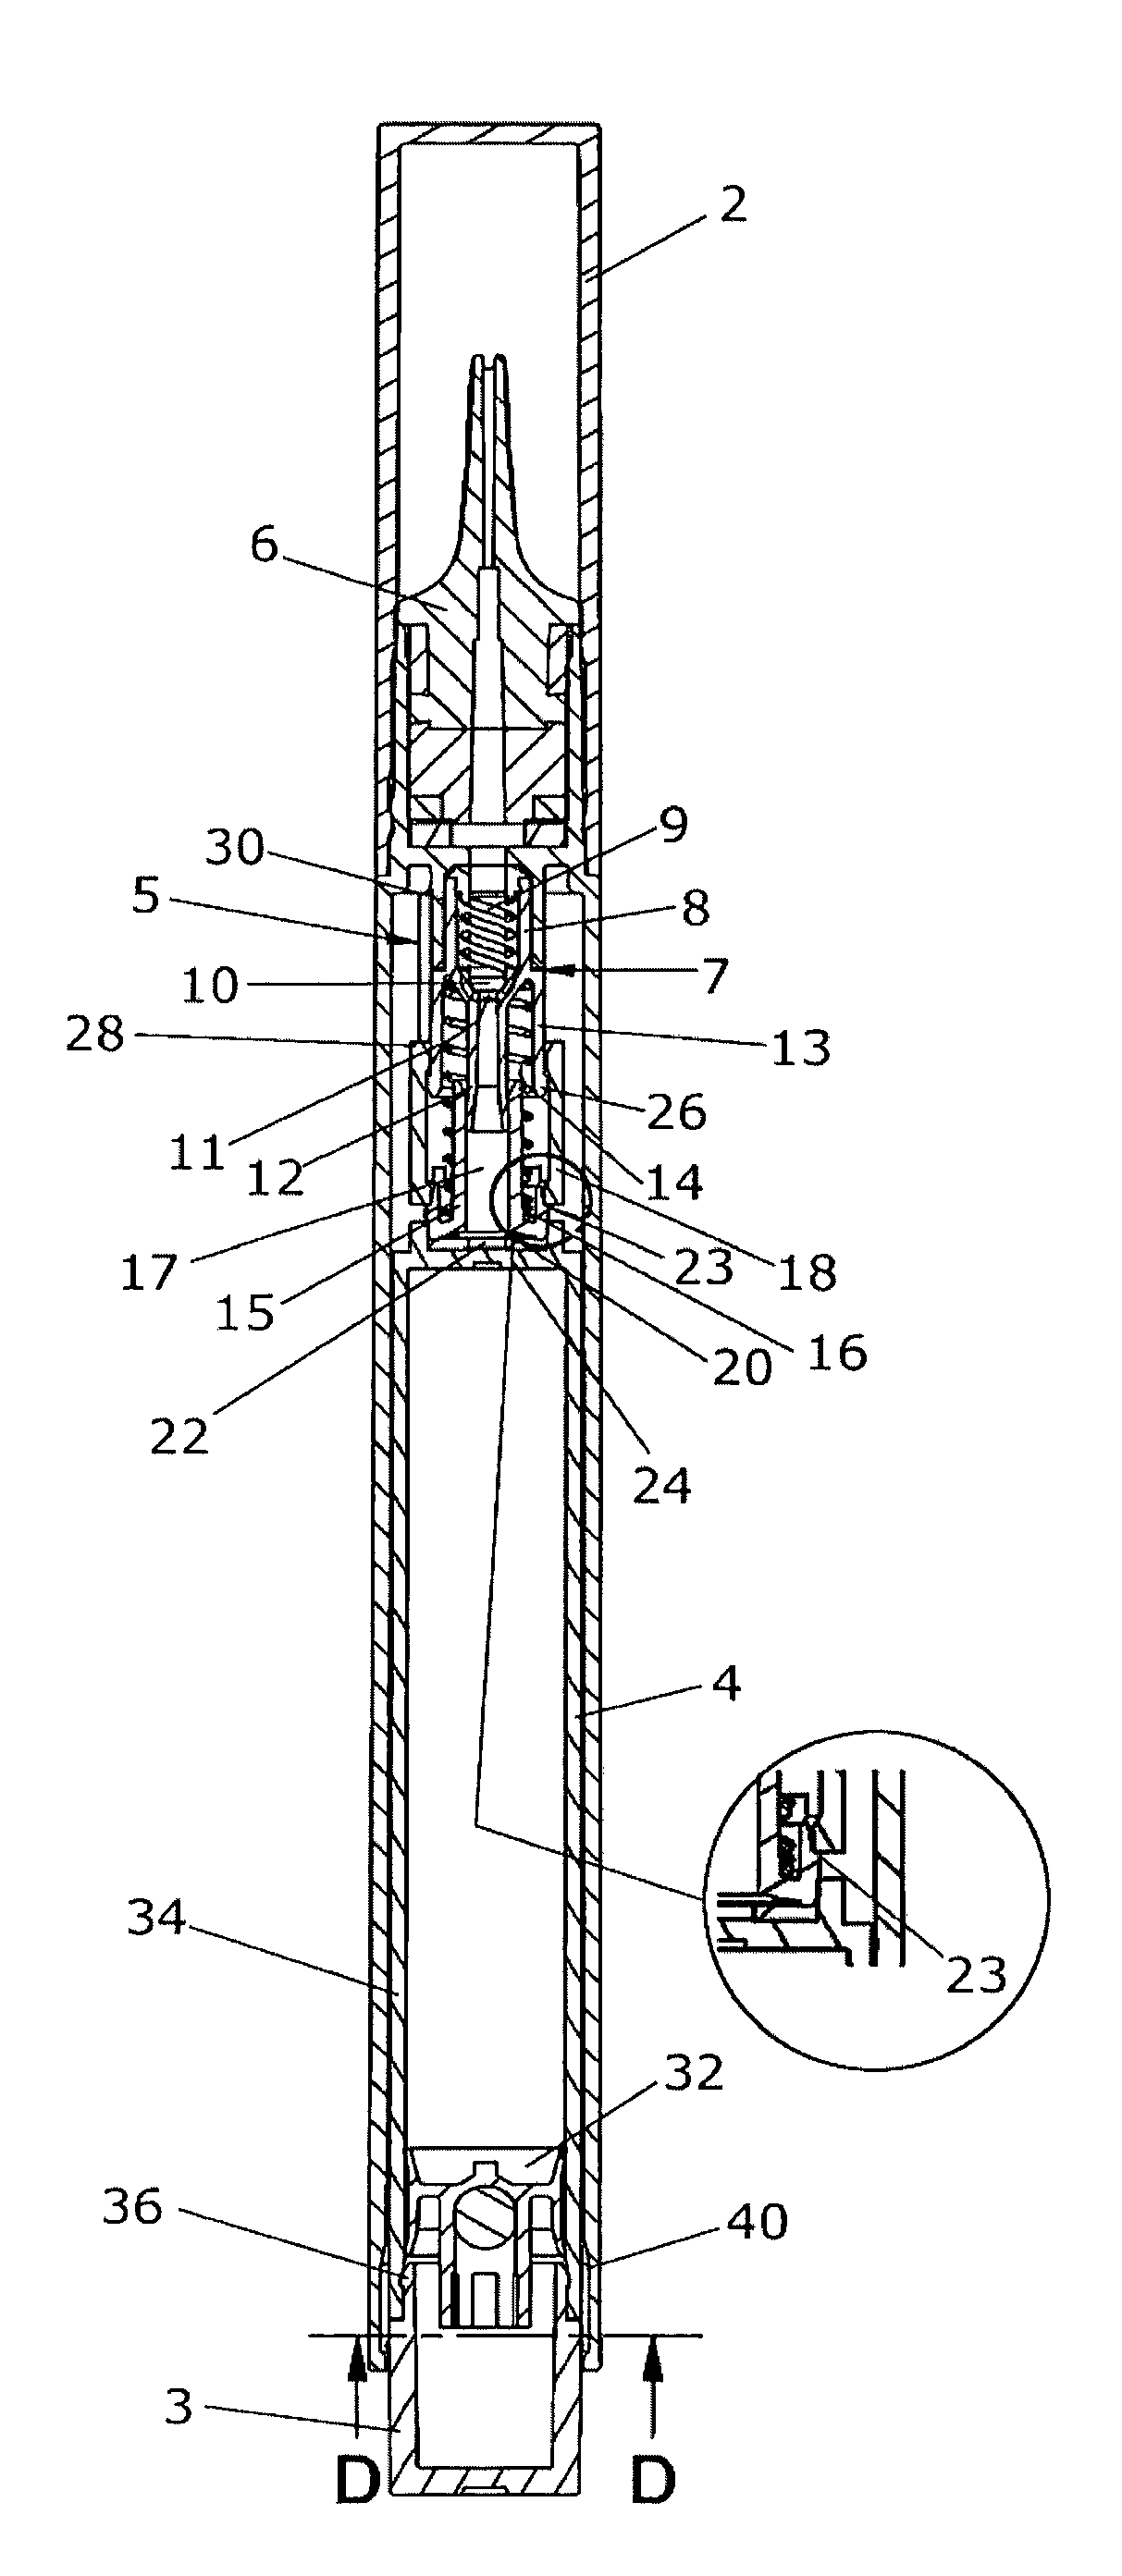 Metering Dispenser for Discharging An In Particular Pasty or Viscous Material, Such As Cosmetic Creams, Adhesives and the Like